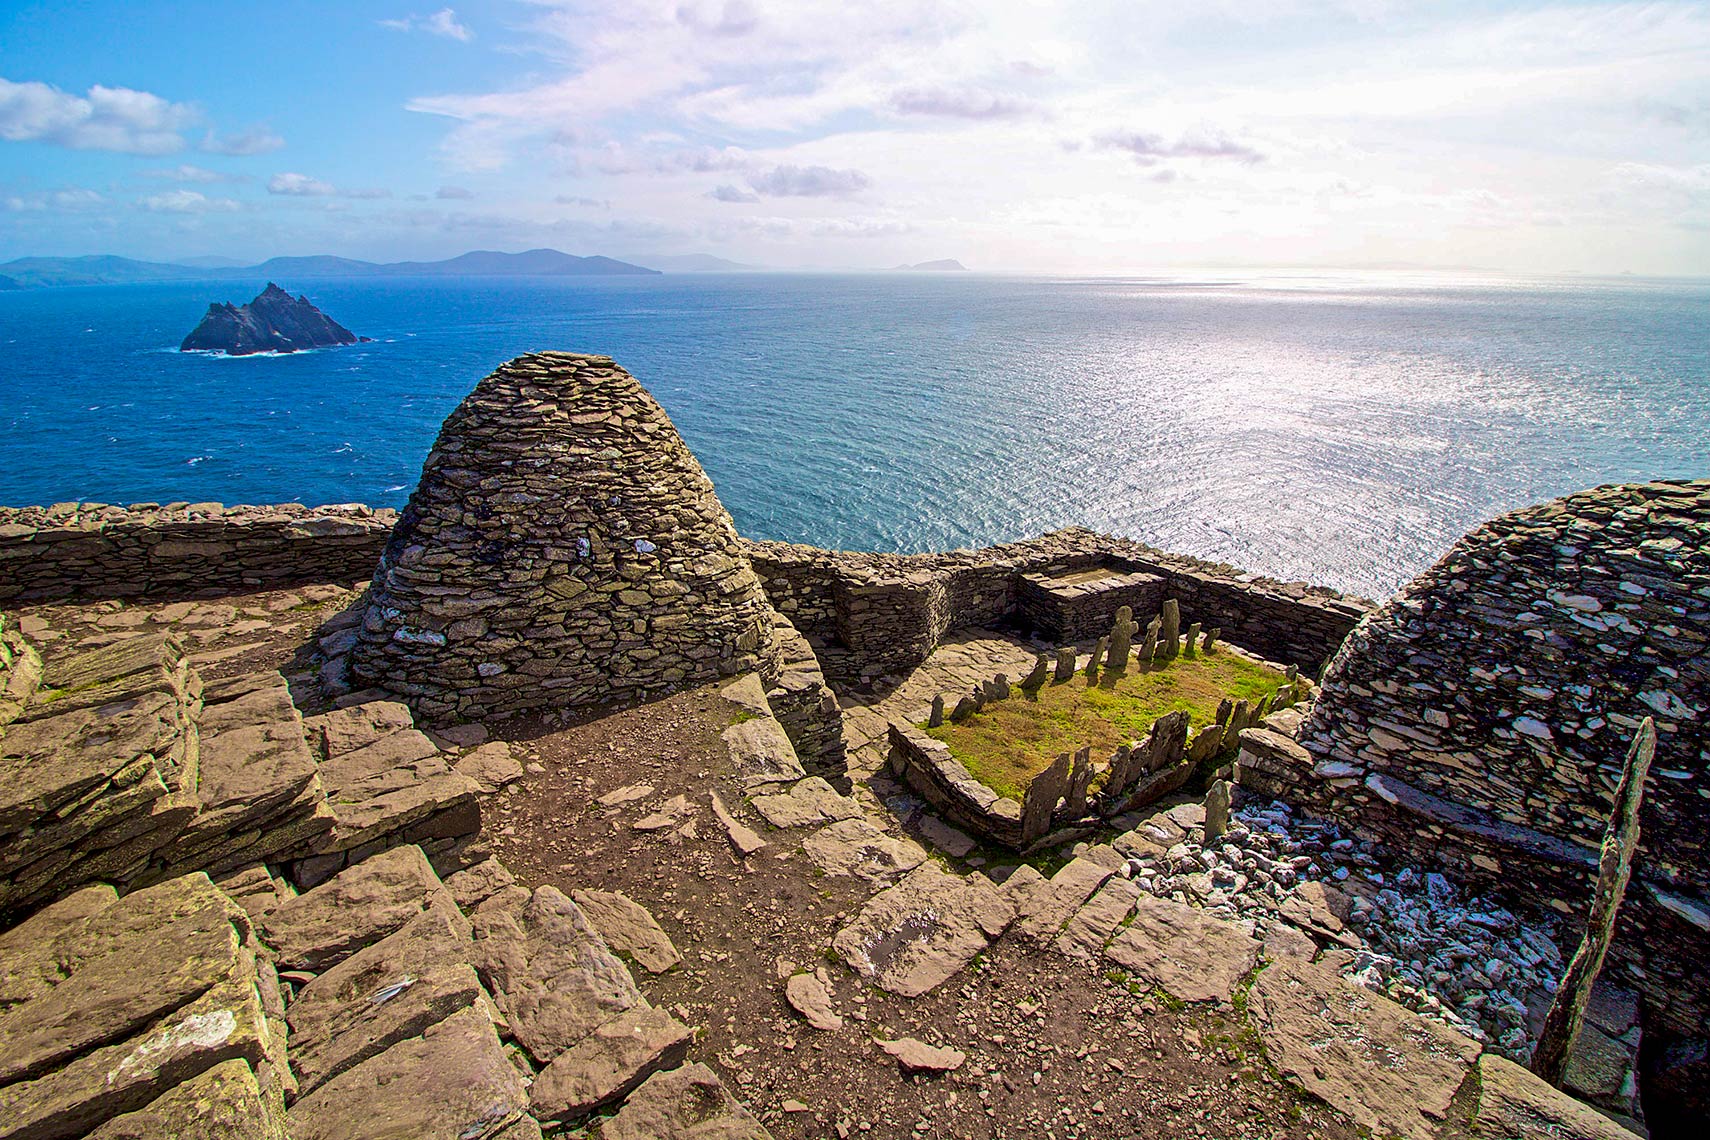 Beehive shaped huts of the 7th century Skellig Michael Monastery